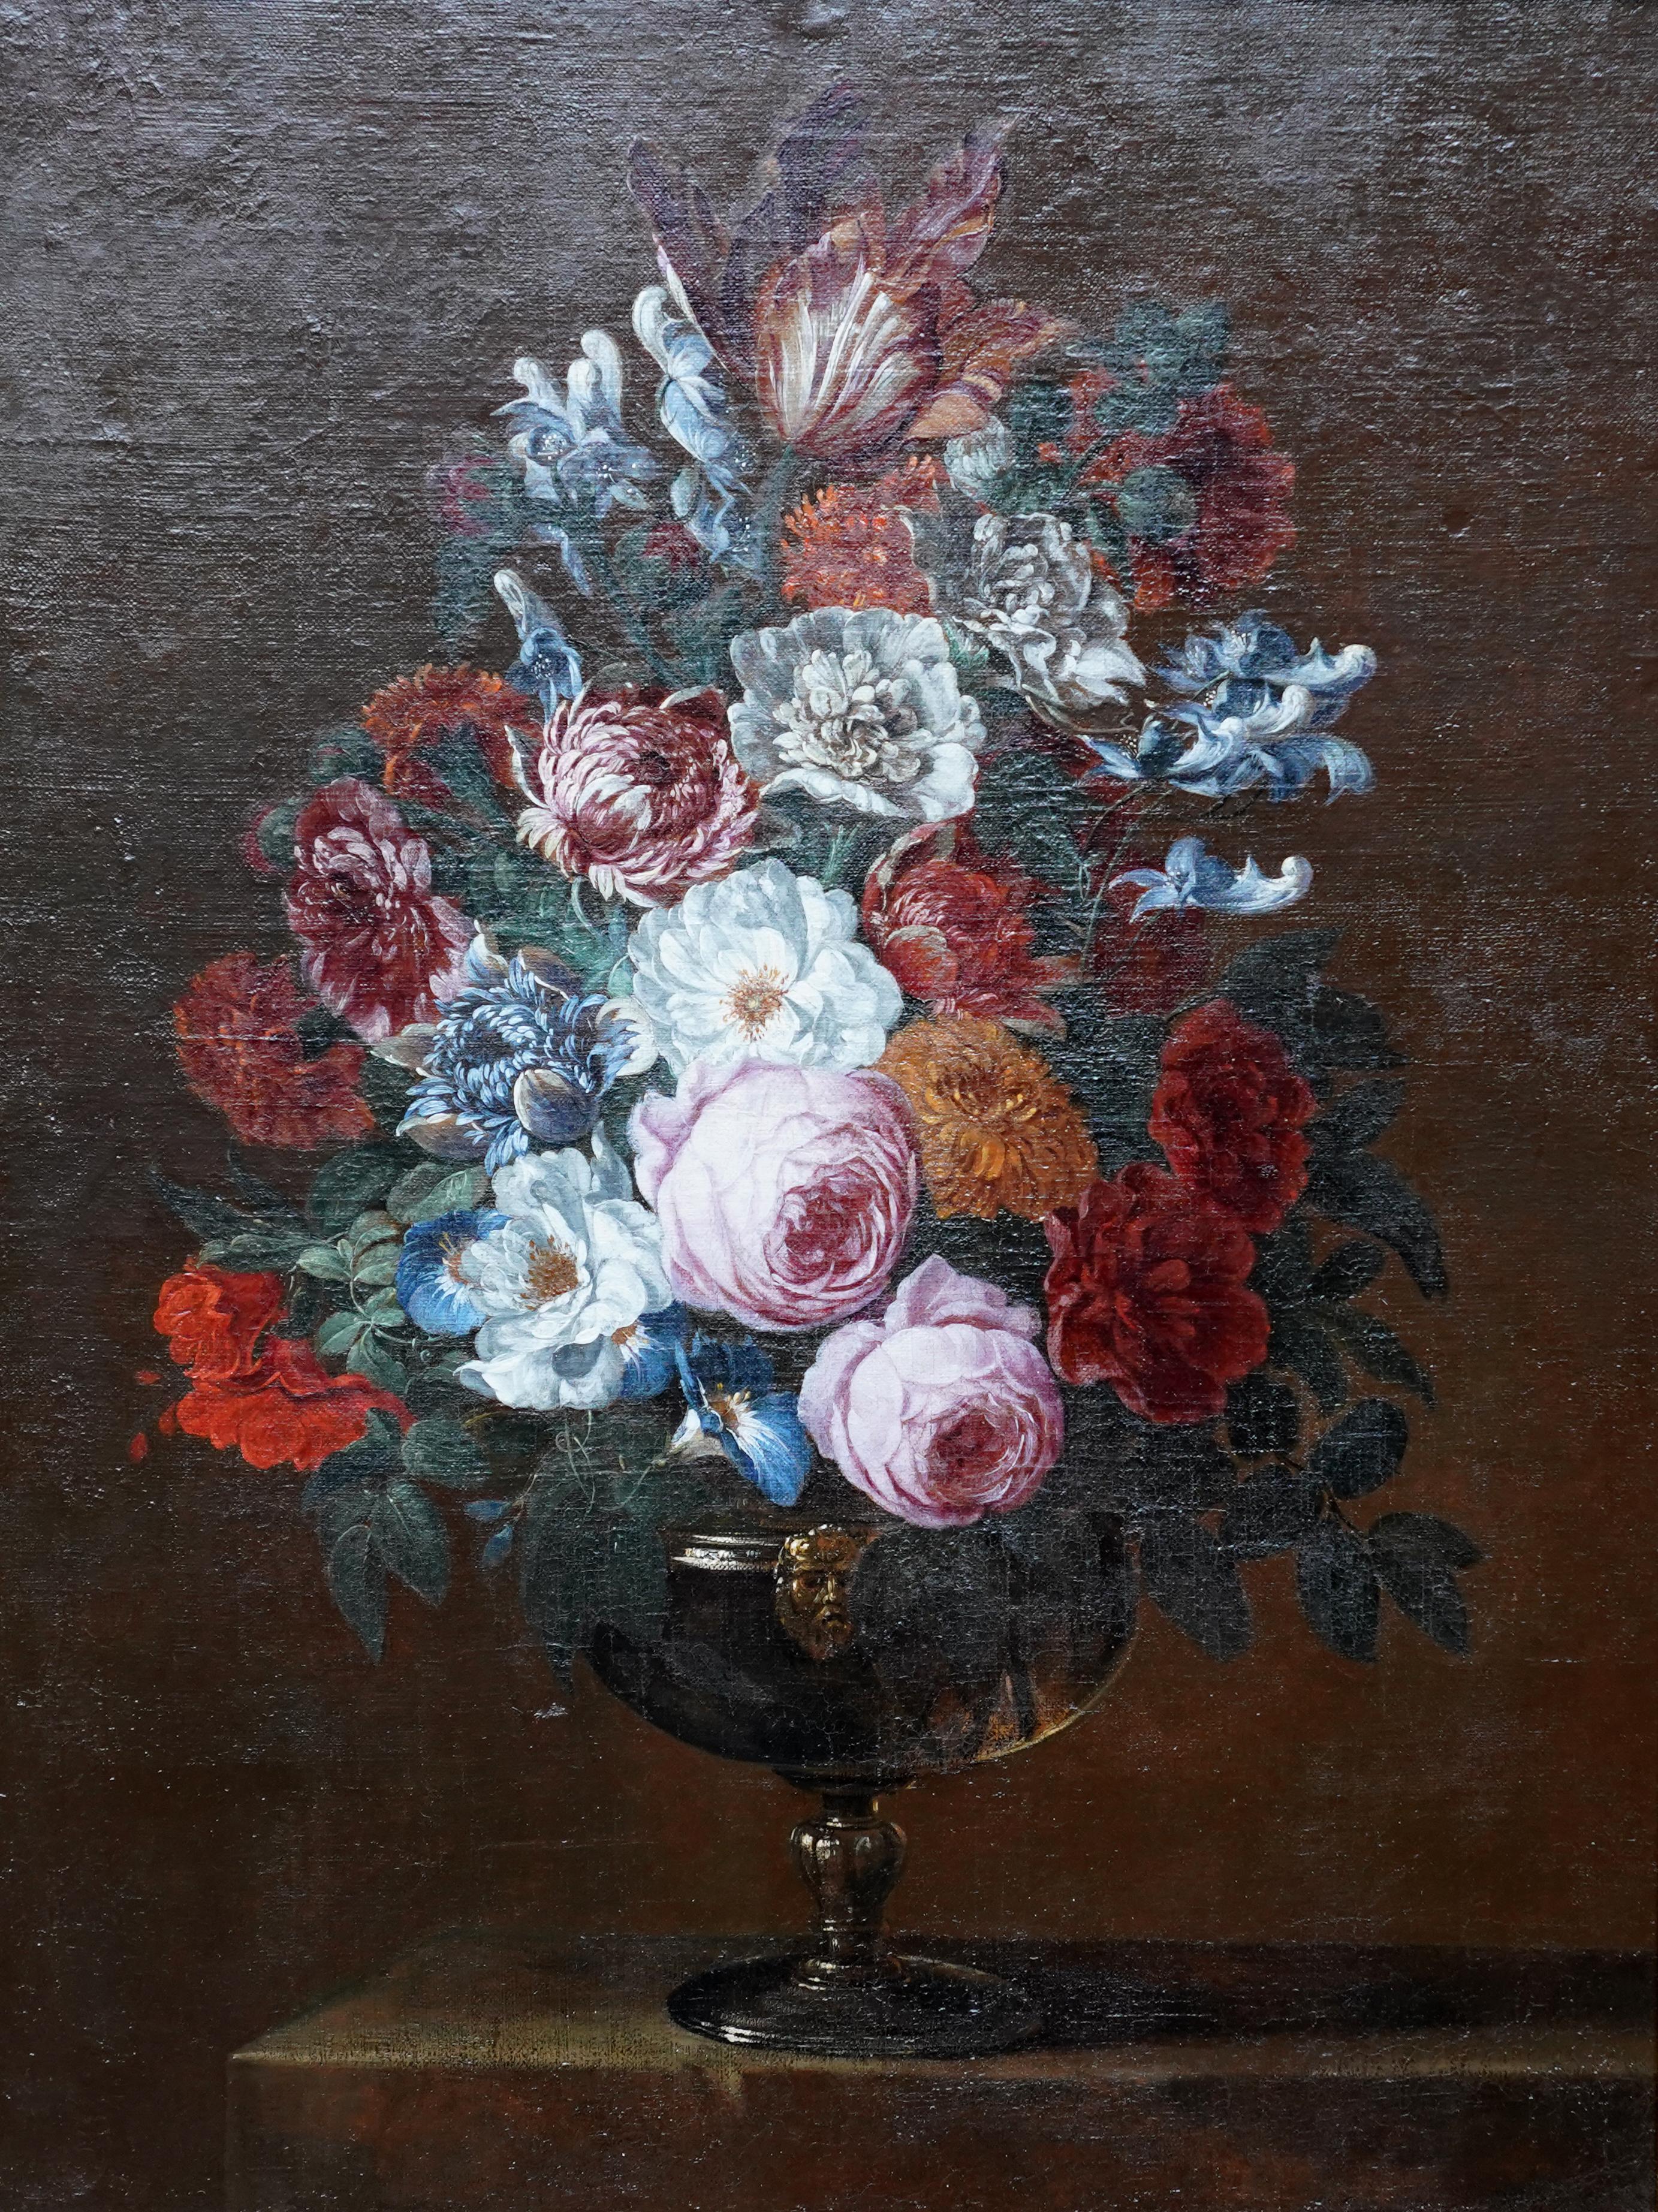 Floral Bouquet with Peonies -Dutch Golden Age art floral still life oil painting 3